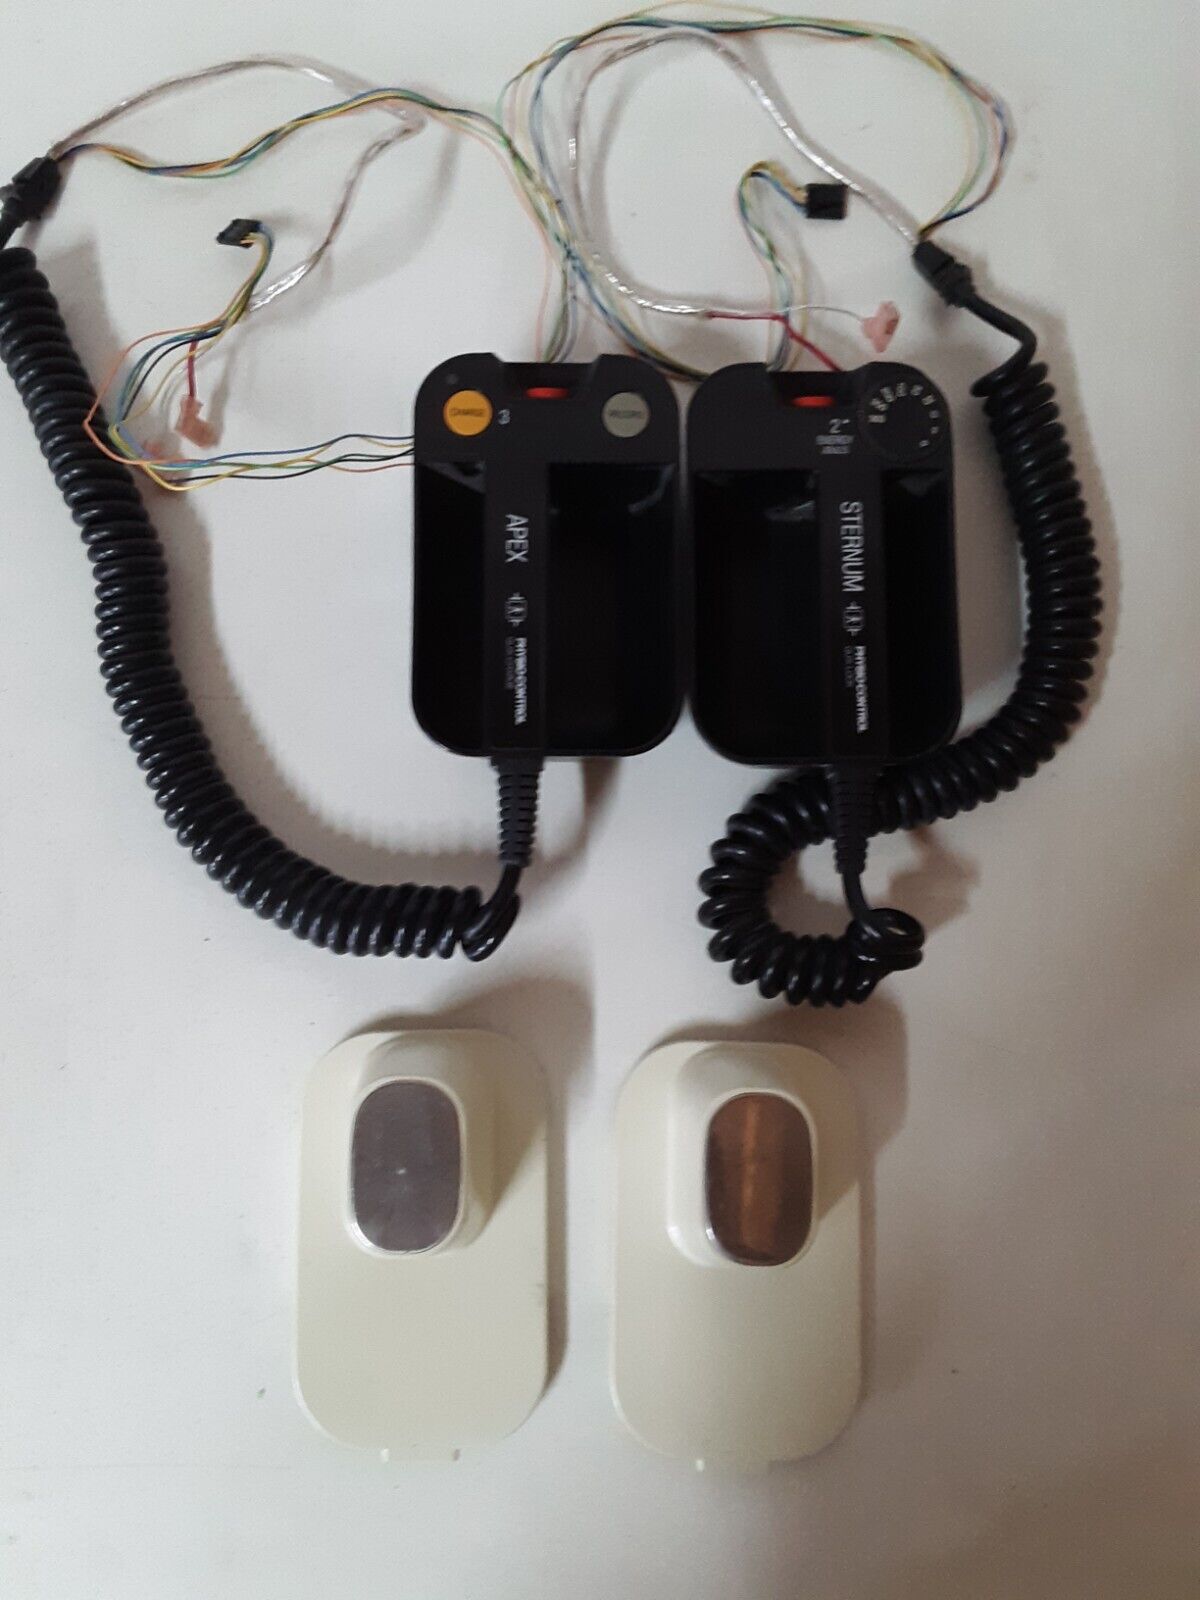 Physio Control Paddles From Lifepak 10 Quick Charge Quick Look & Pediatric